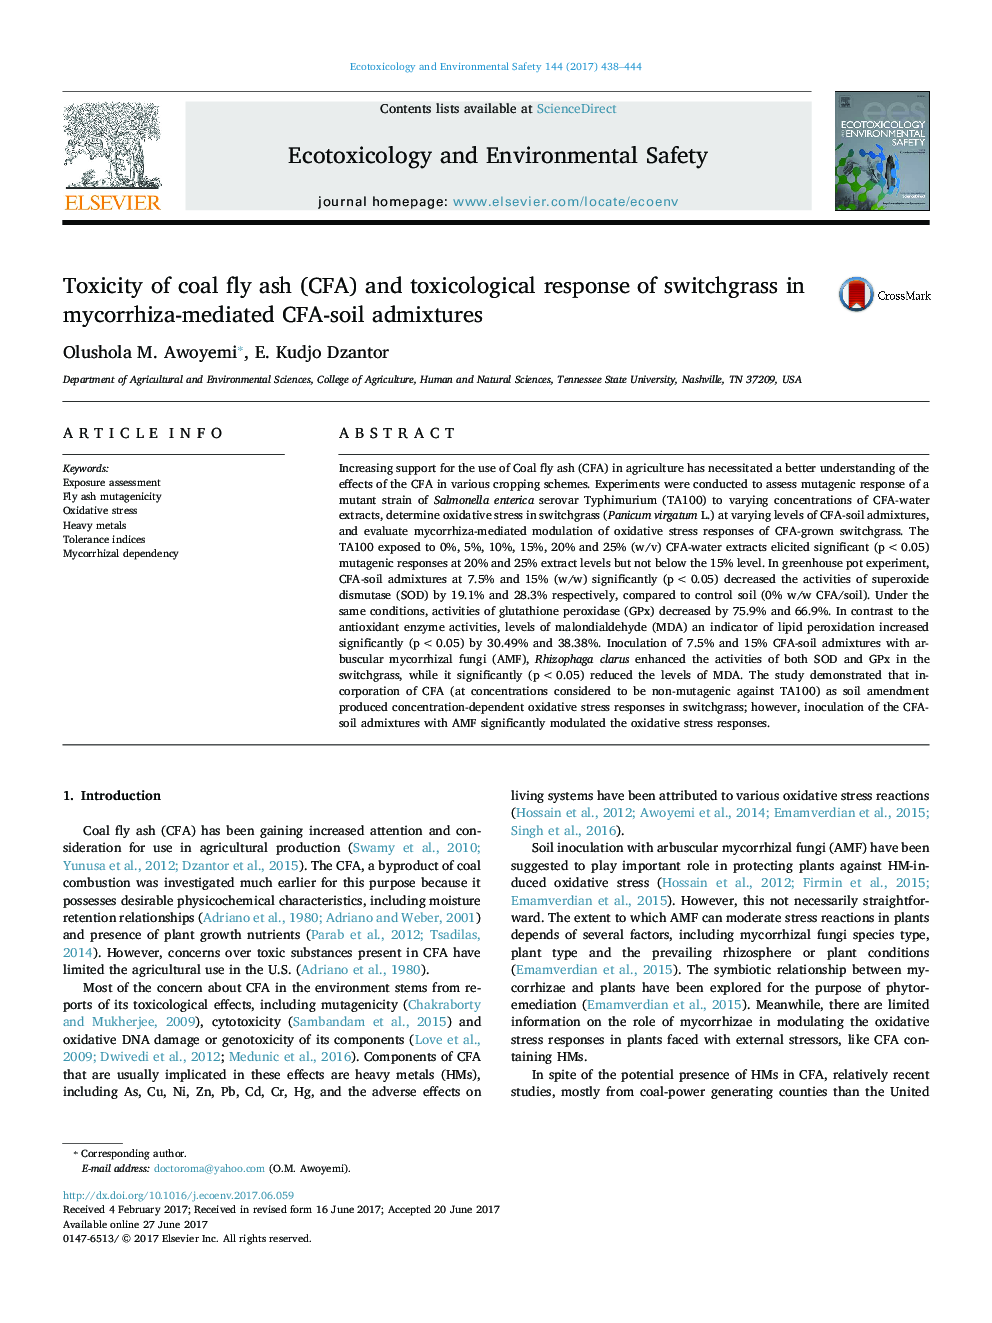 Toxicity of coal fly ash (CFA) and toxicological response of switchgrass in mycorrhiza-mediated CFA-soil admixtures